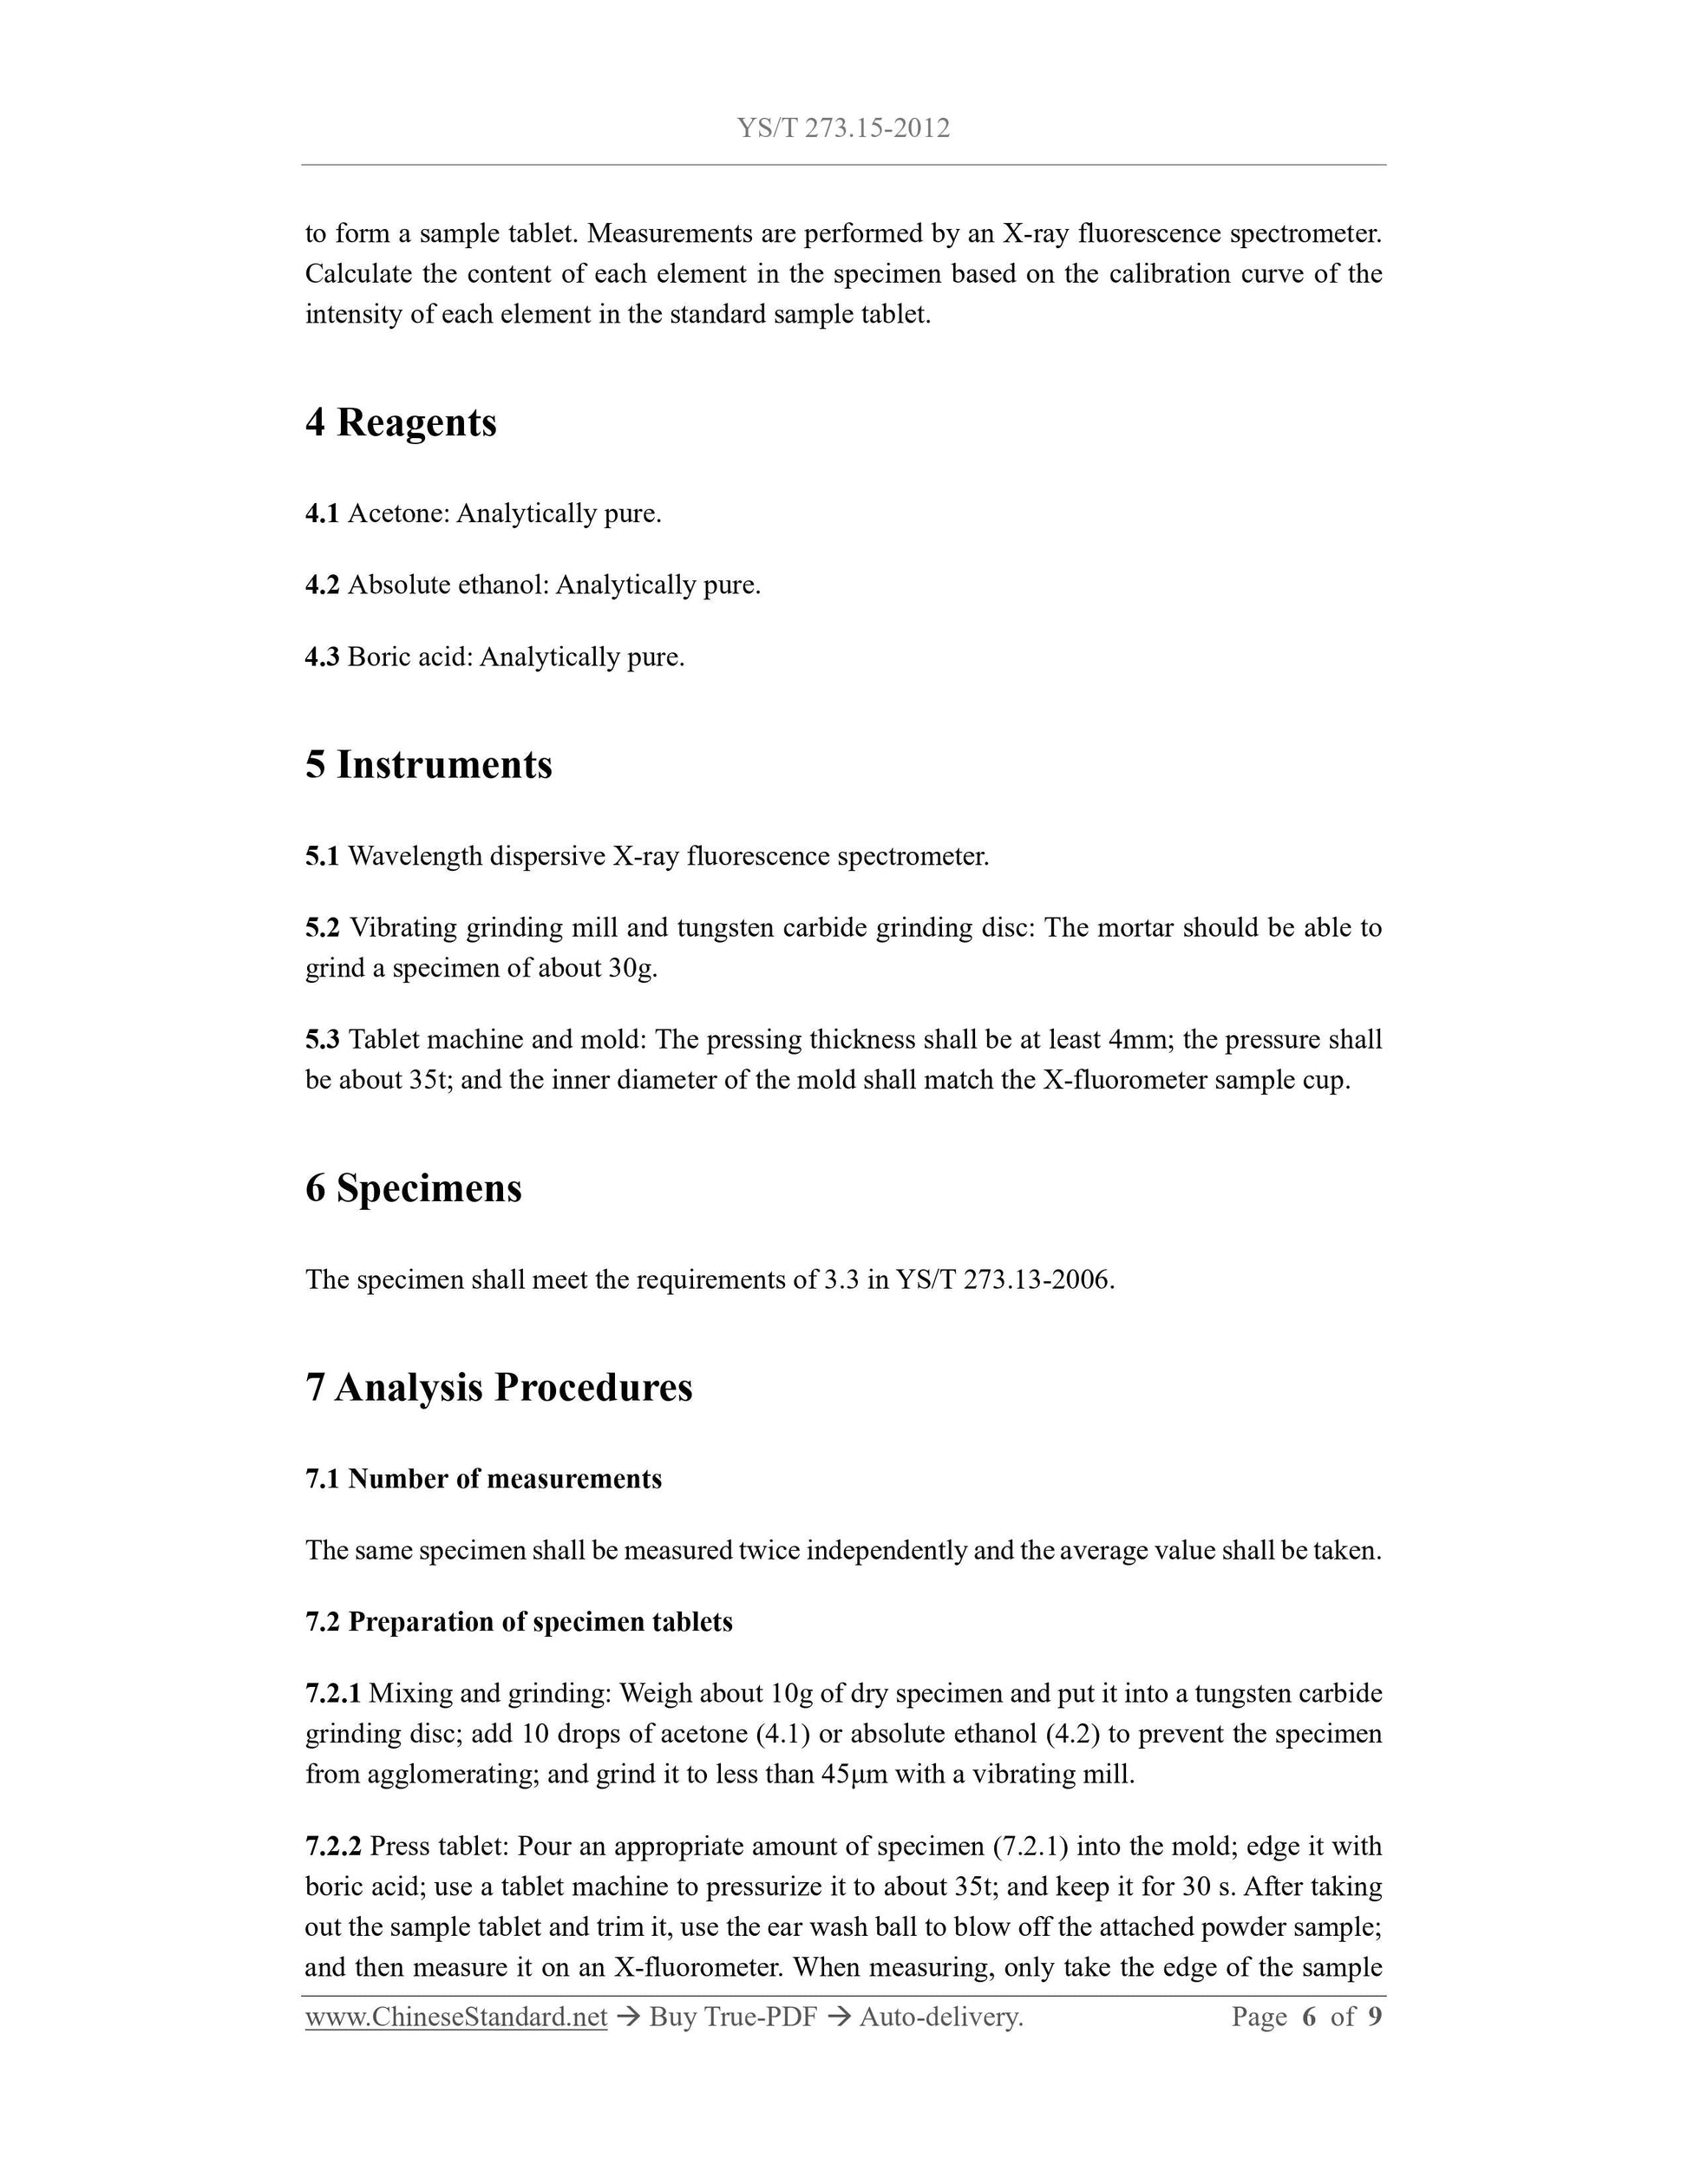 YS/T 273.15-2012 Page 4